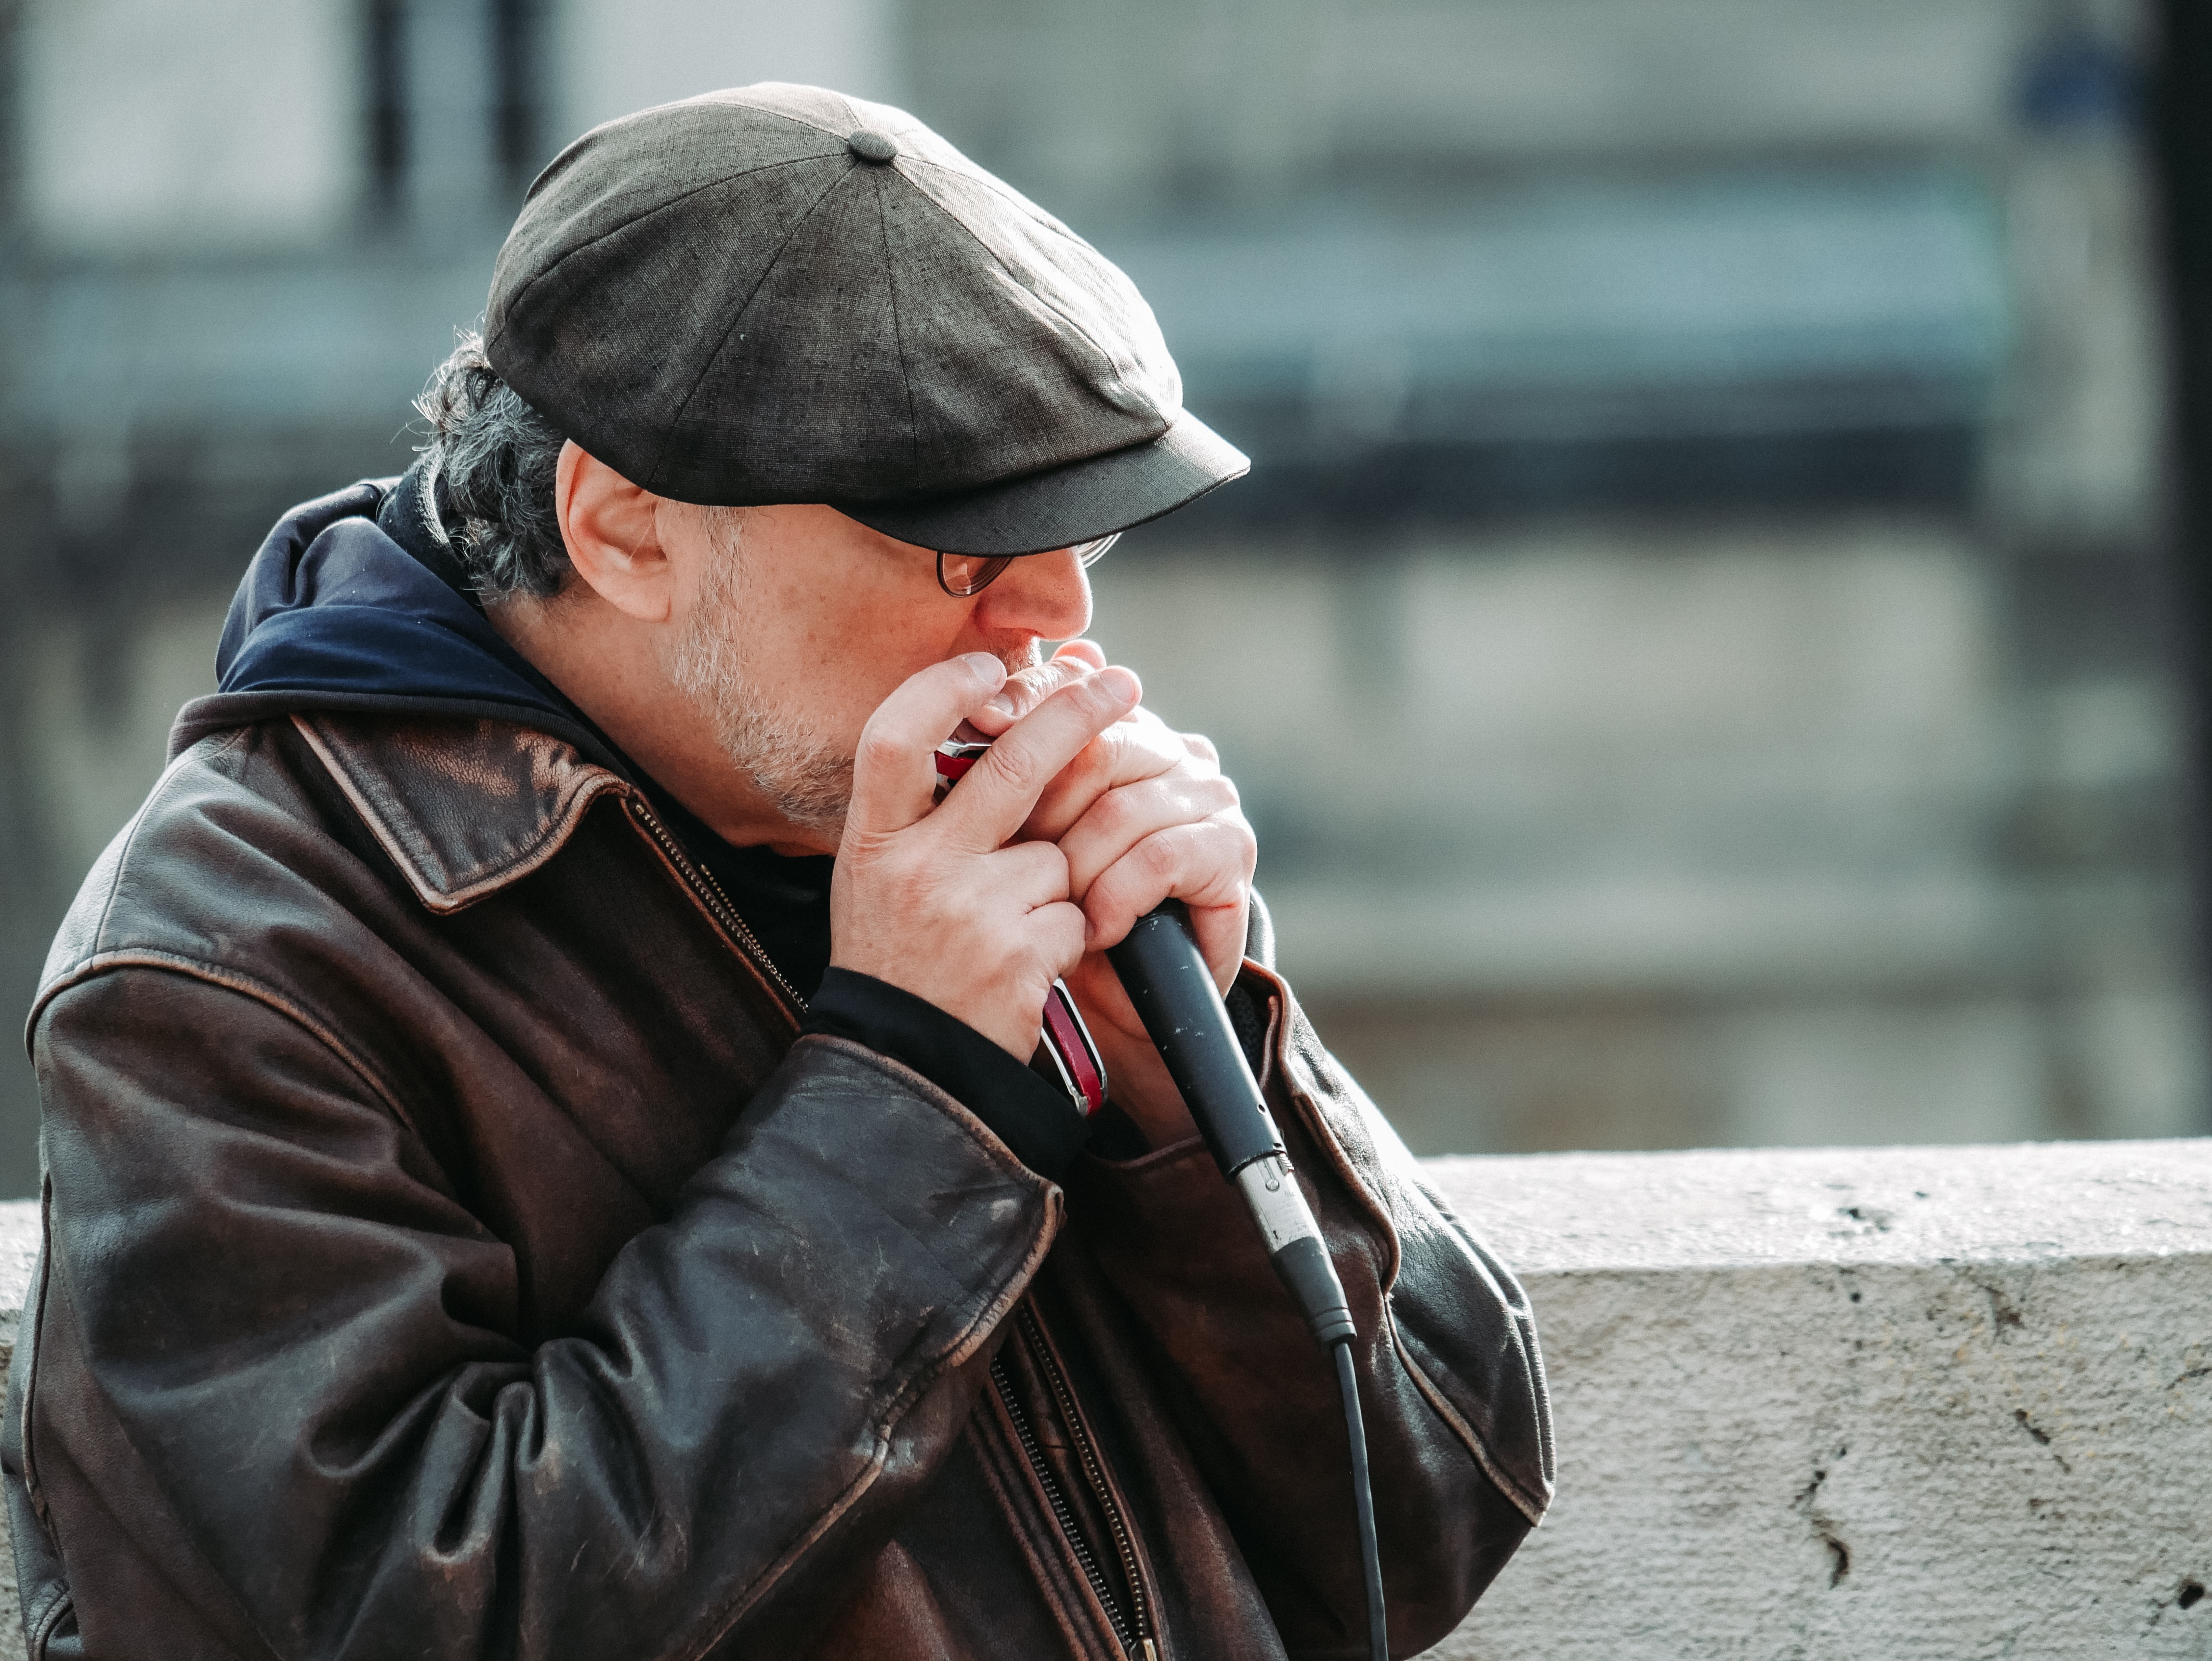 sixtyish year old man outdoors playing harmonica into a microphone. Wearing worn leather jacket and newspaper hat. Short grey beard and glasses.